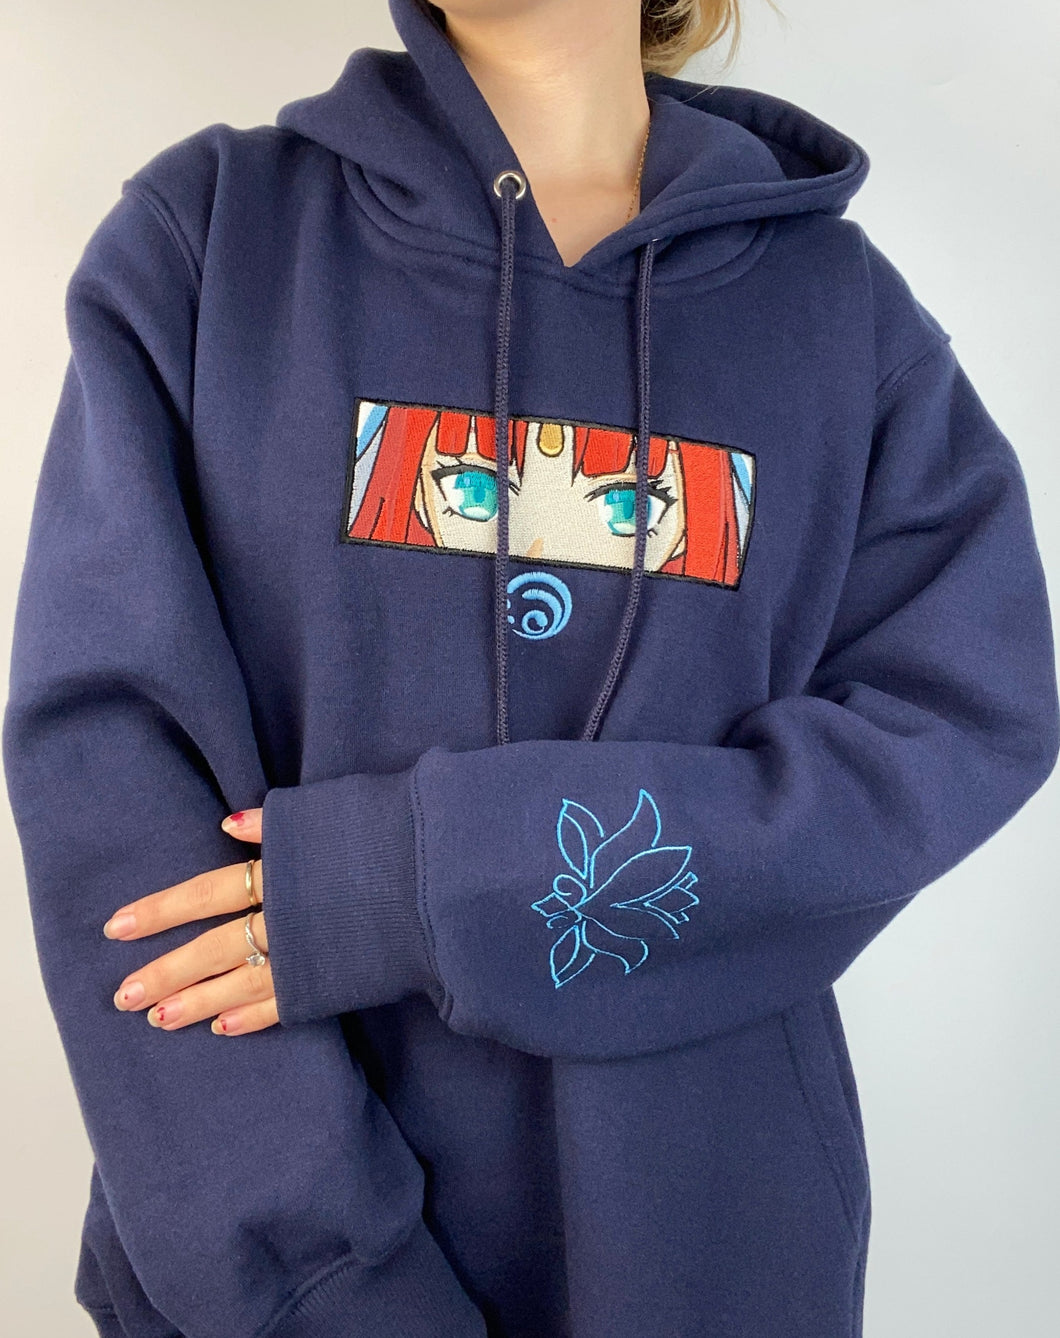 Nilou Embroidered Navy Blue Hoodie